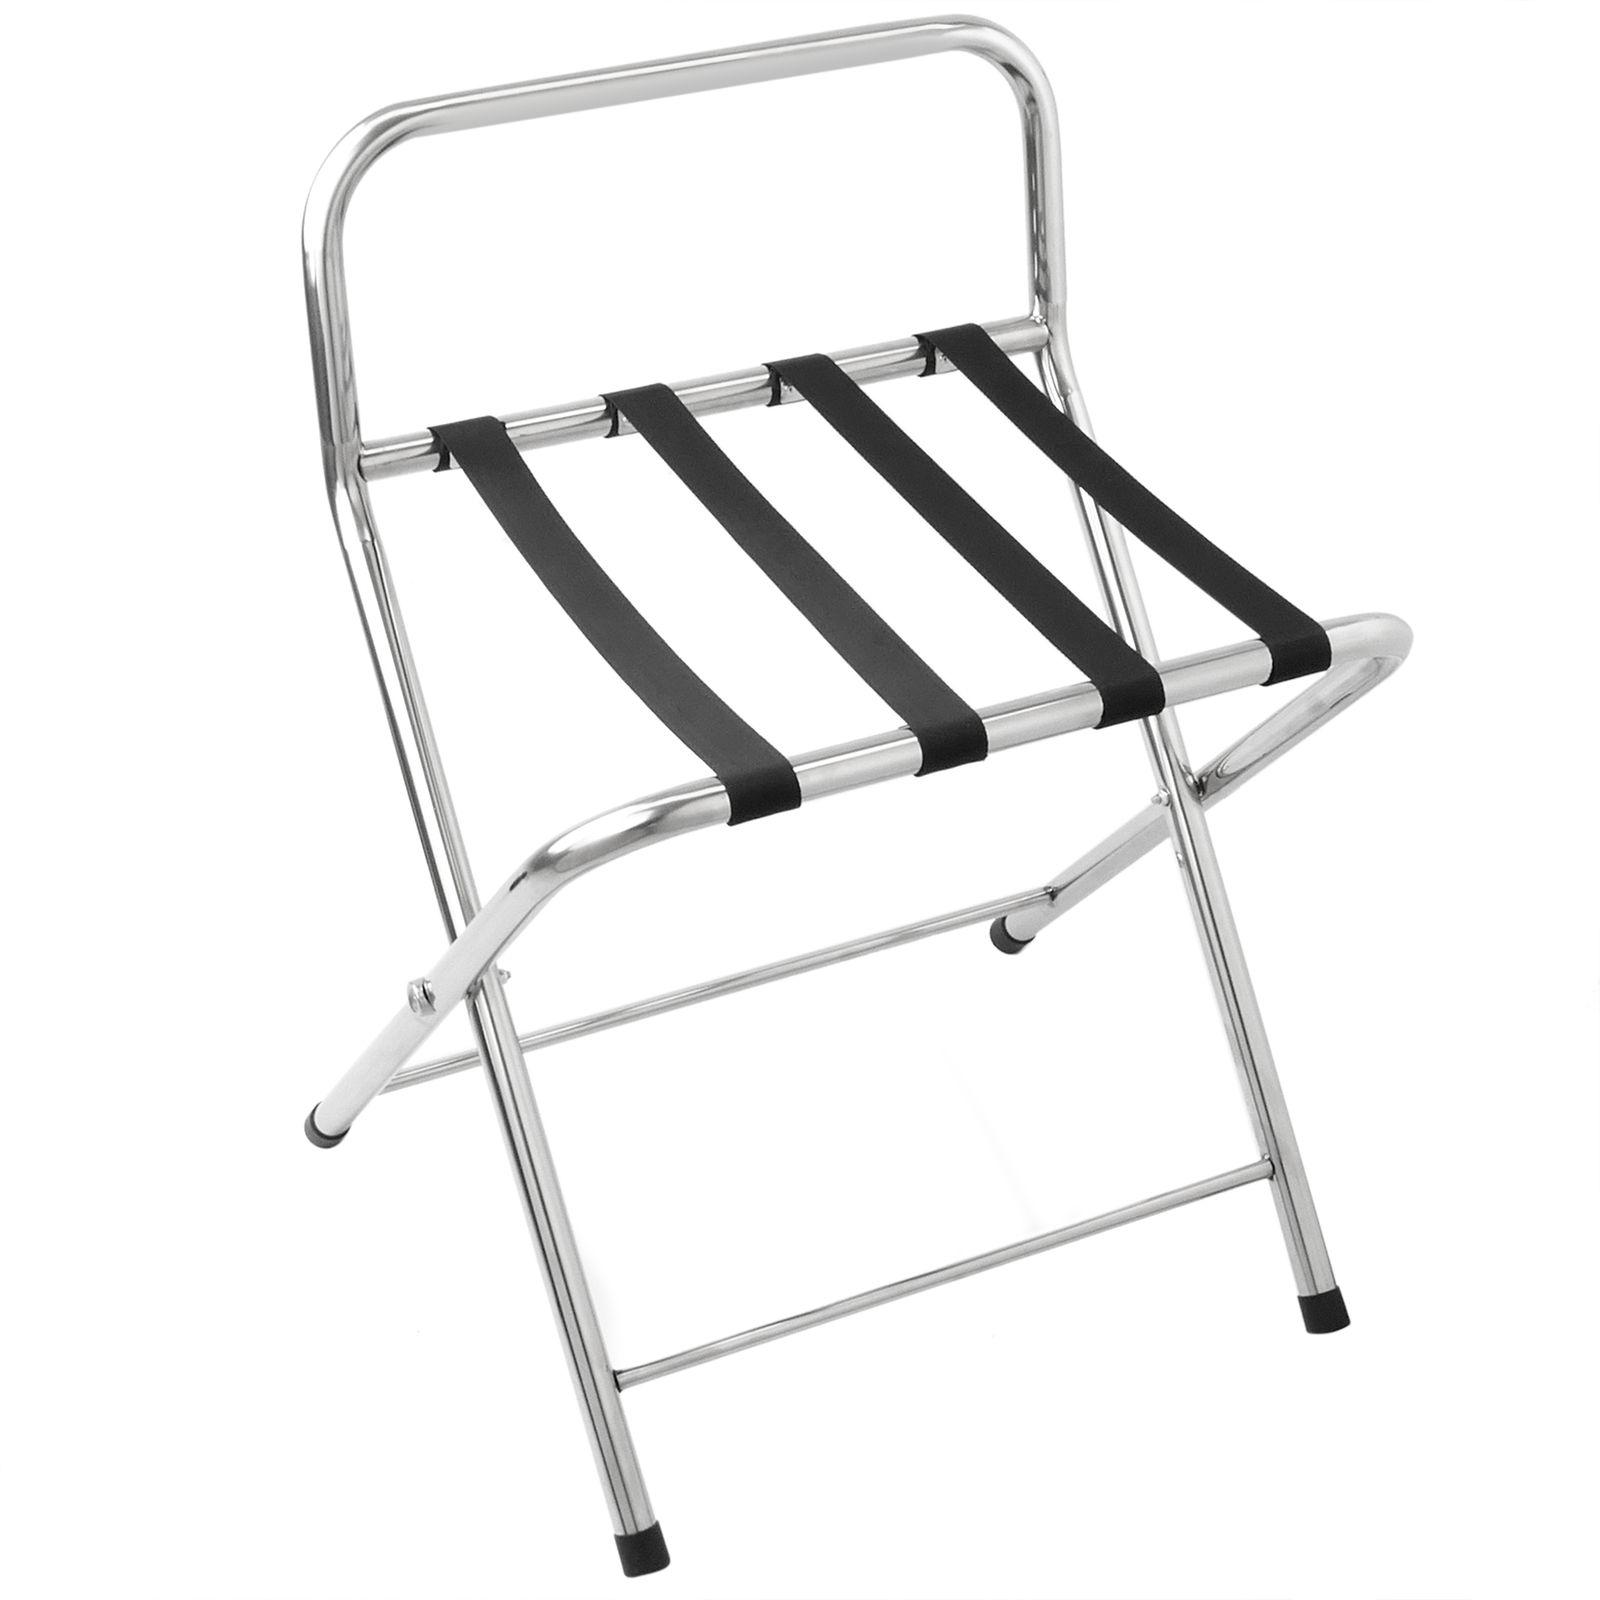 Relaxdays Folding Stand Wooden Luggage Rack White 54,5 x 66 x 44 cm Suitcase Stool for Hotel & Home H x D: 54.5 x 66 x 44 cm 